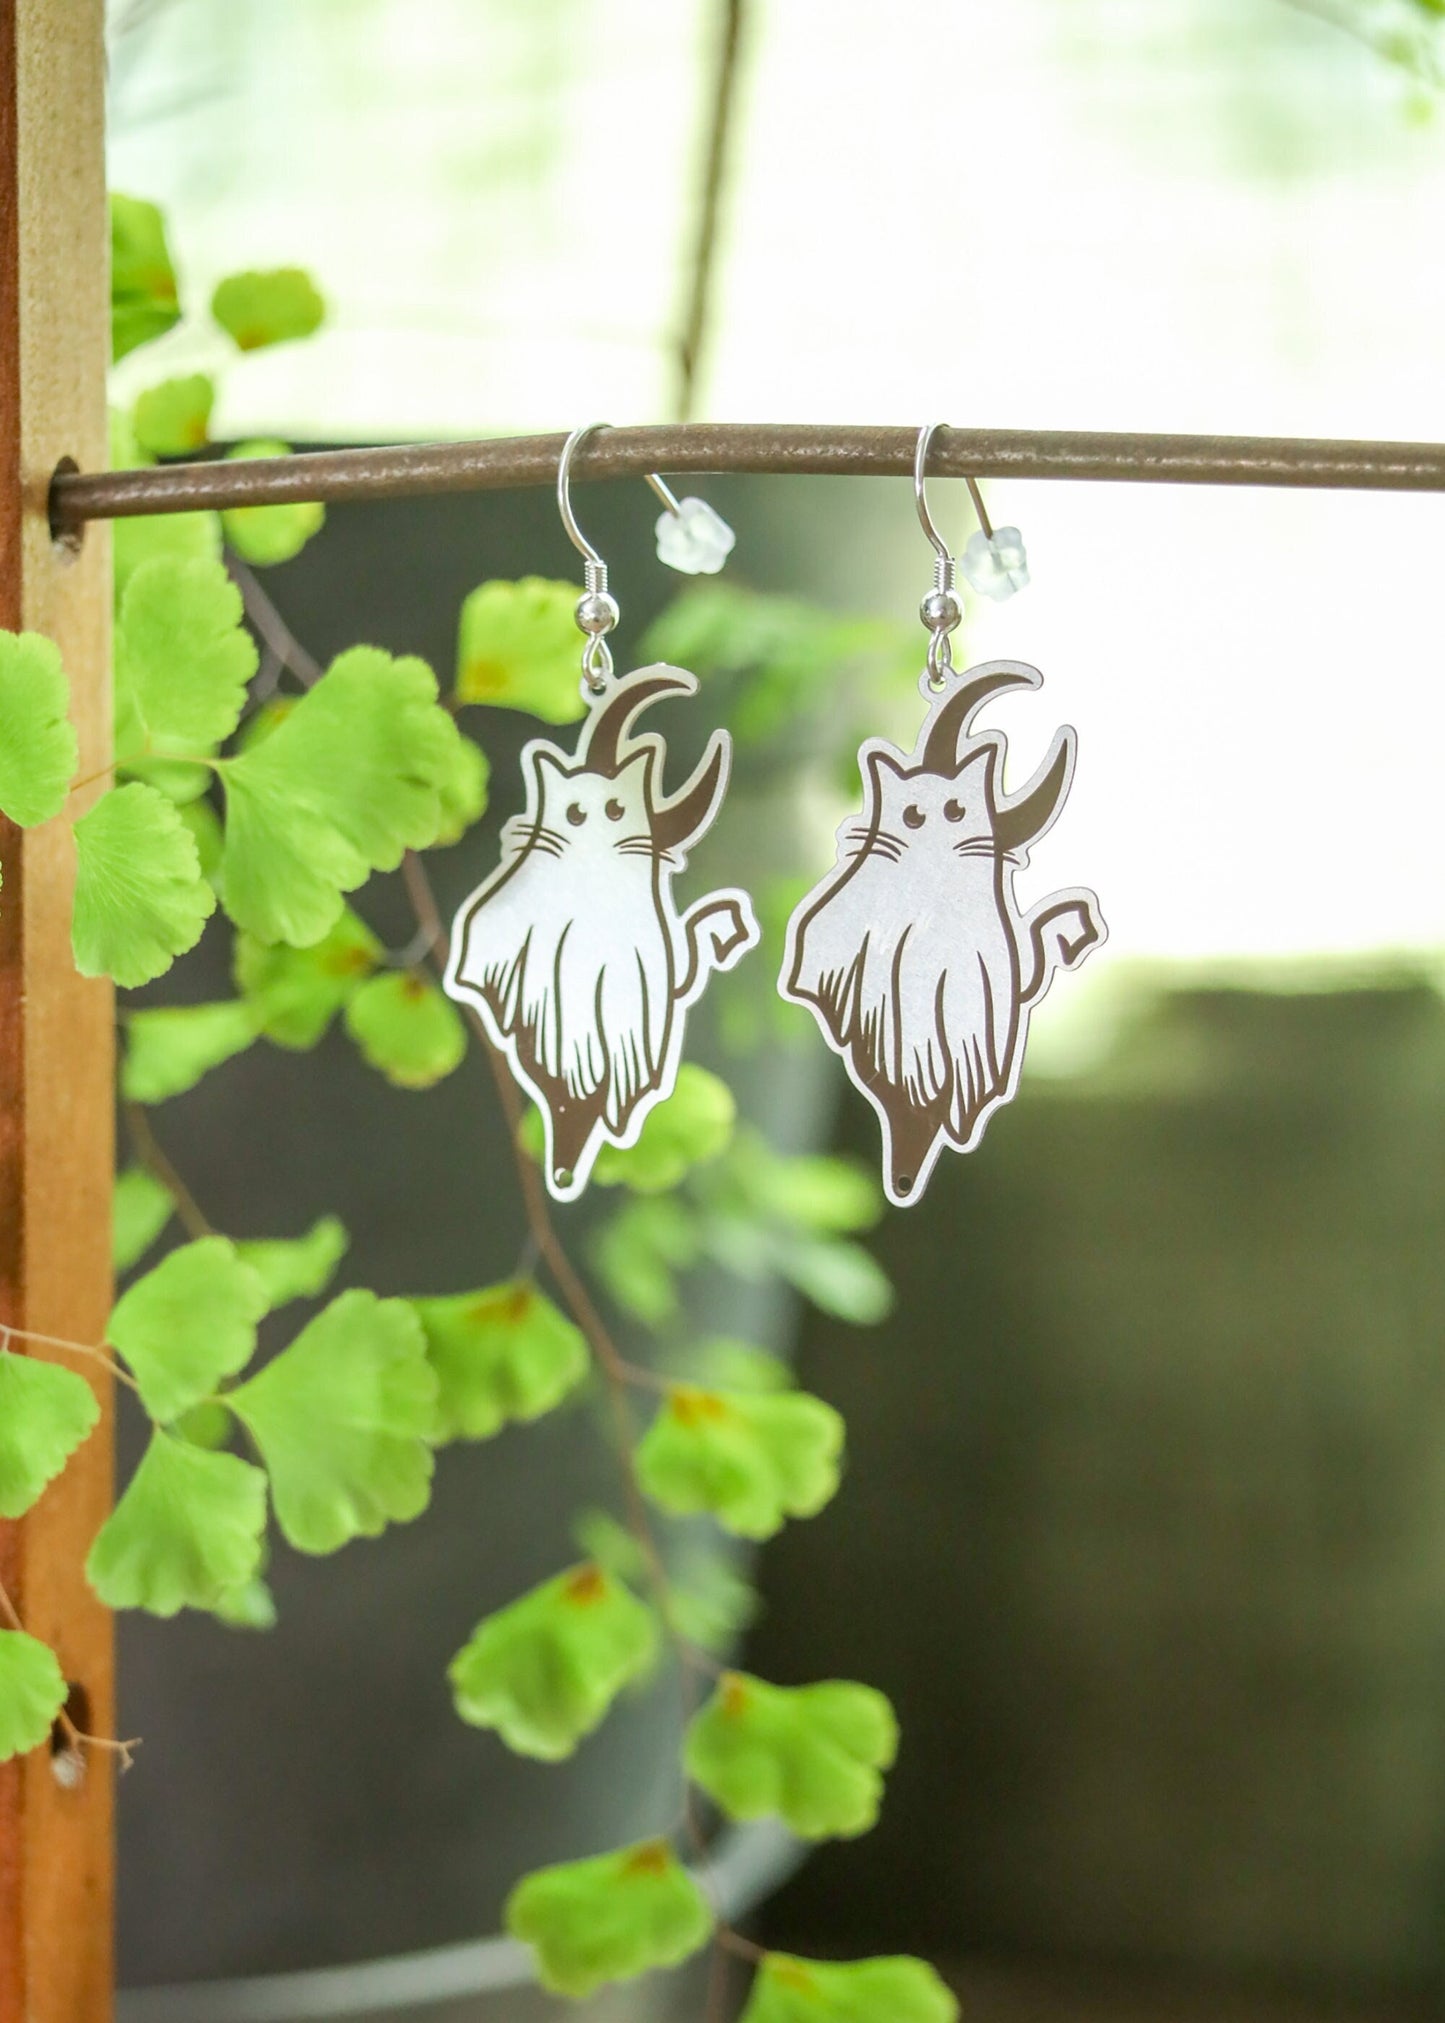 Ghost Cat Earrings | Witchy Halloween Kitty Dangles | Stainless Steel Charm Sterling Silver Ear Wire | Spooky Kawaii Cottagecore Jewelry